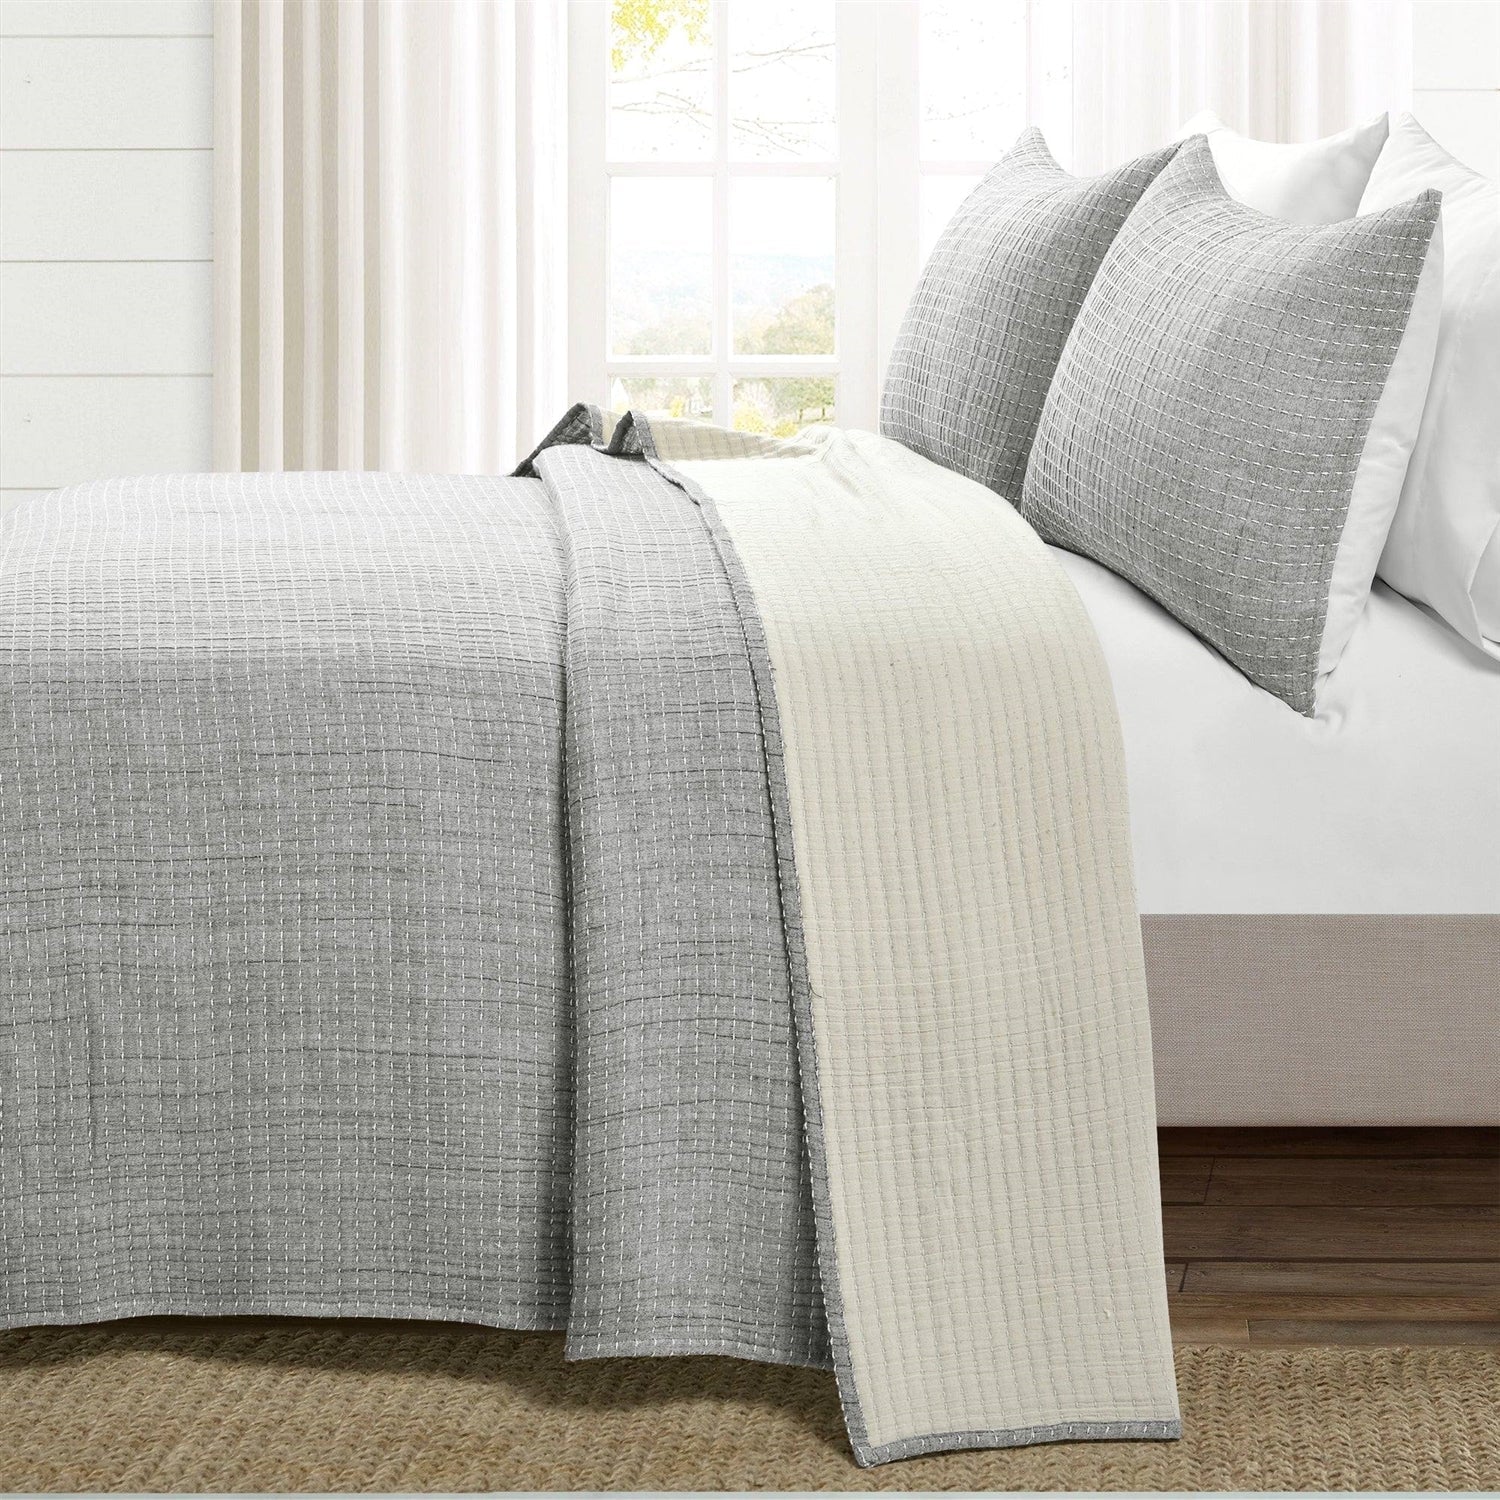 Bedroom > Quilts & Blankets - King Size 3-Piece Reversible Cotton Yarn Woven Coverlet Set In Grey Cream